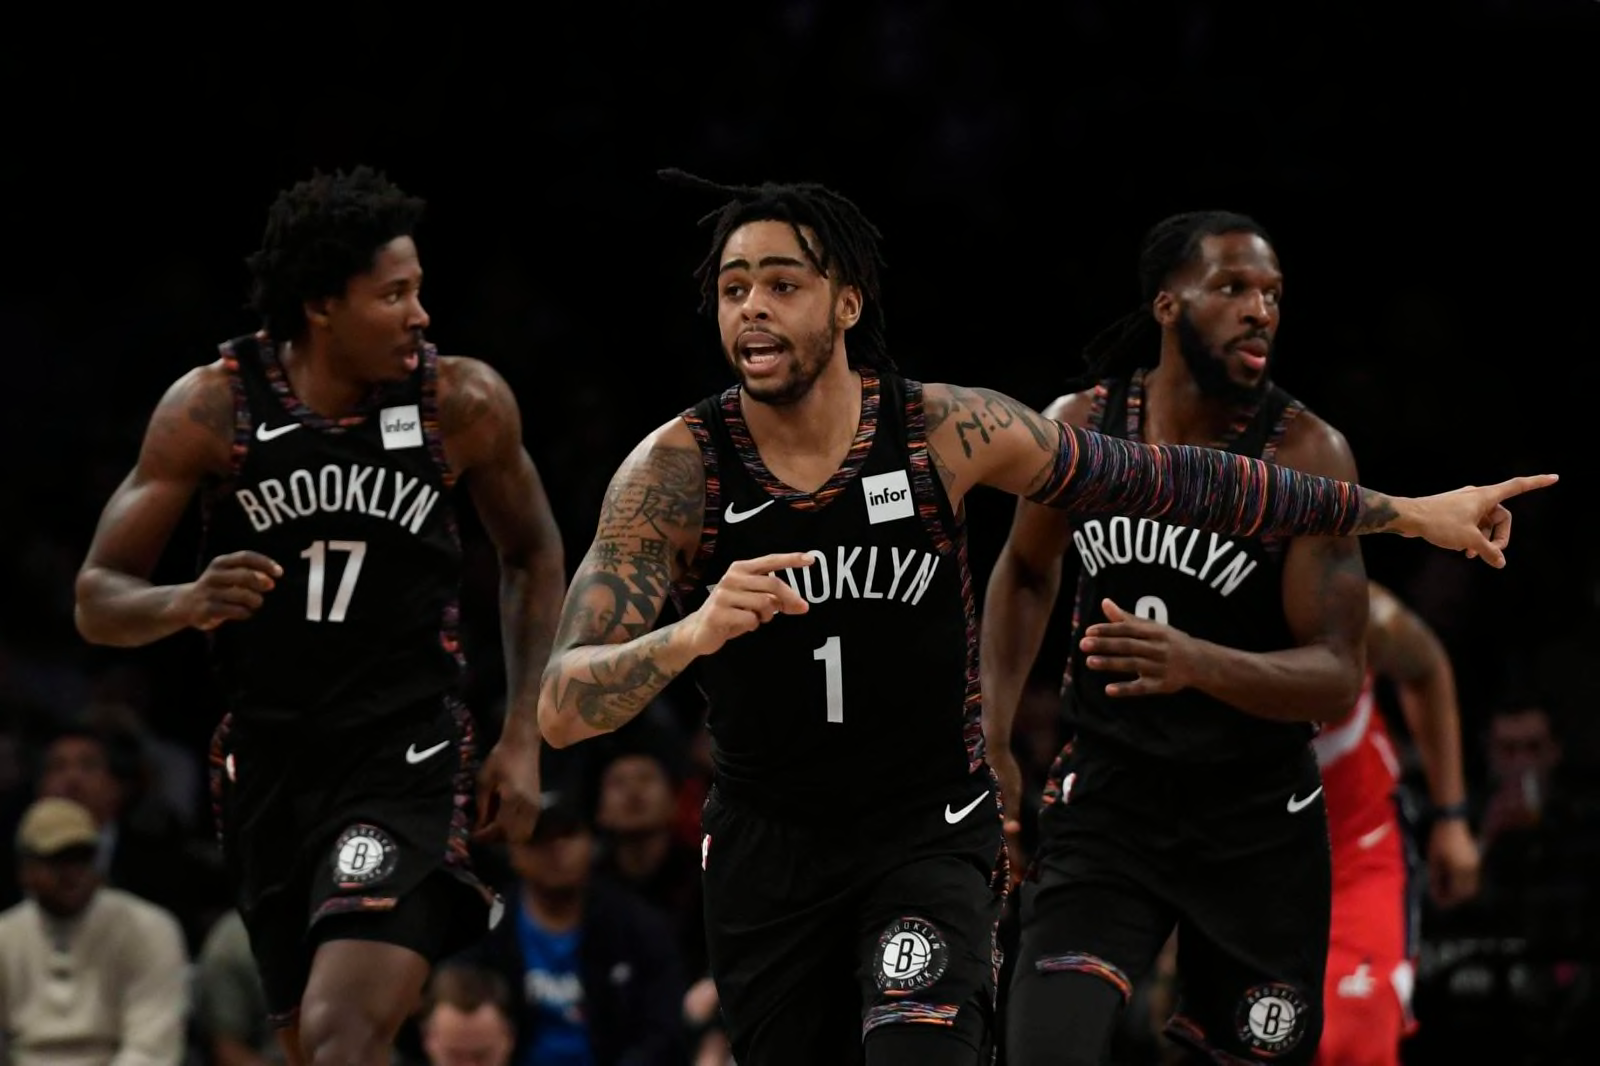 new jersey nets roster 2018